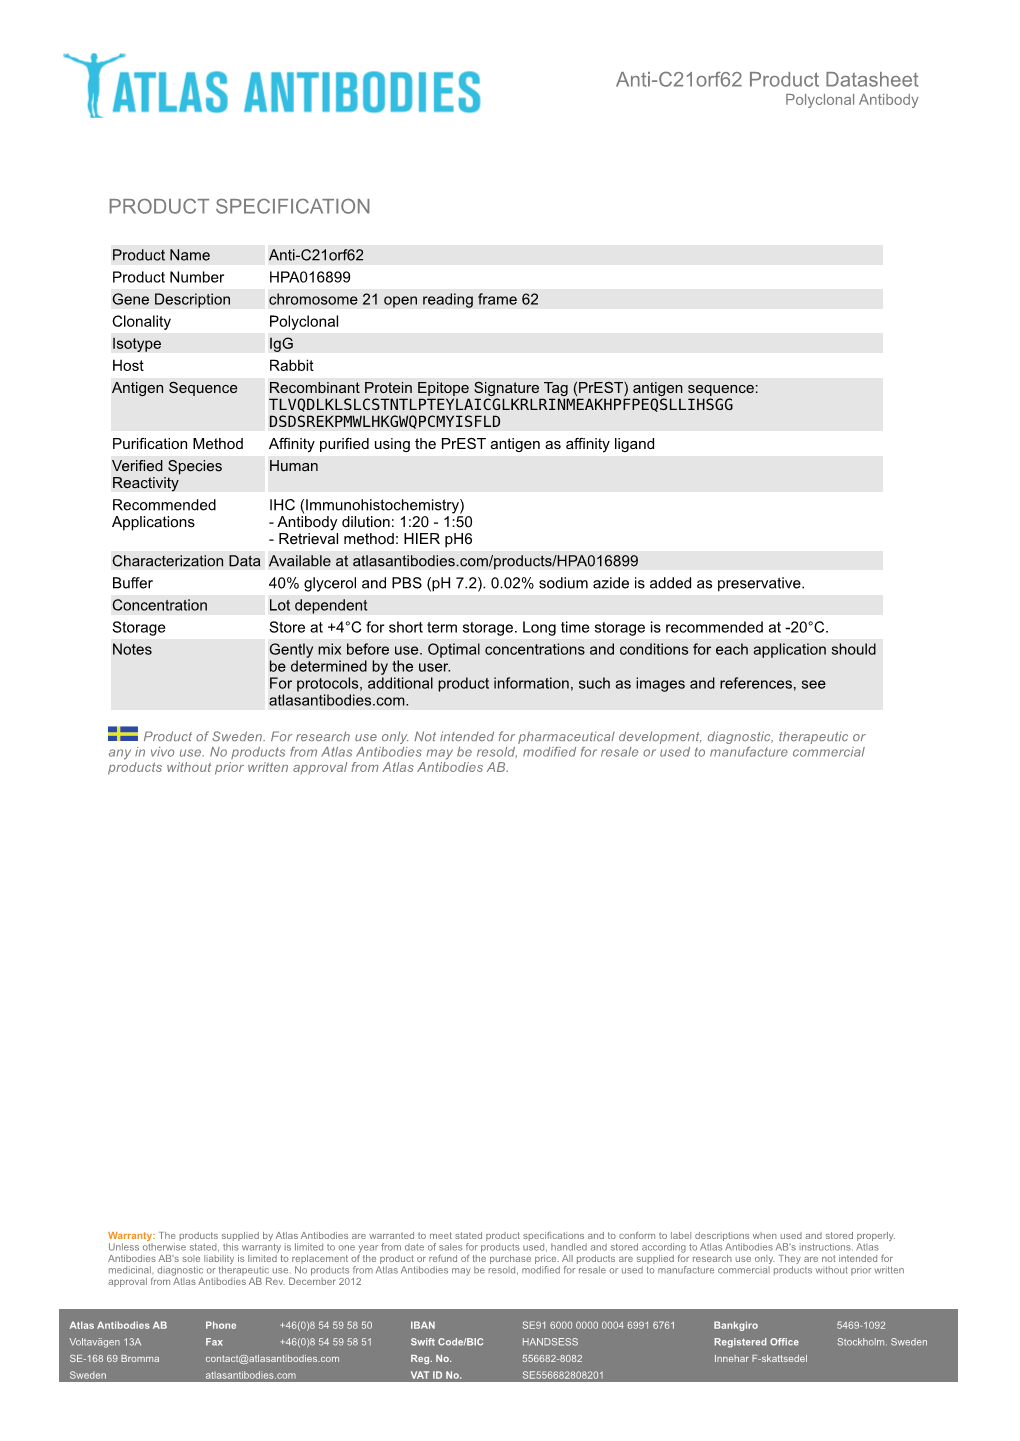 PRODUCT SPECIFICATION Anti-C21orf62